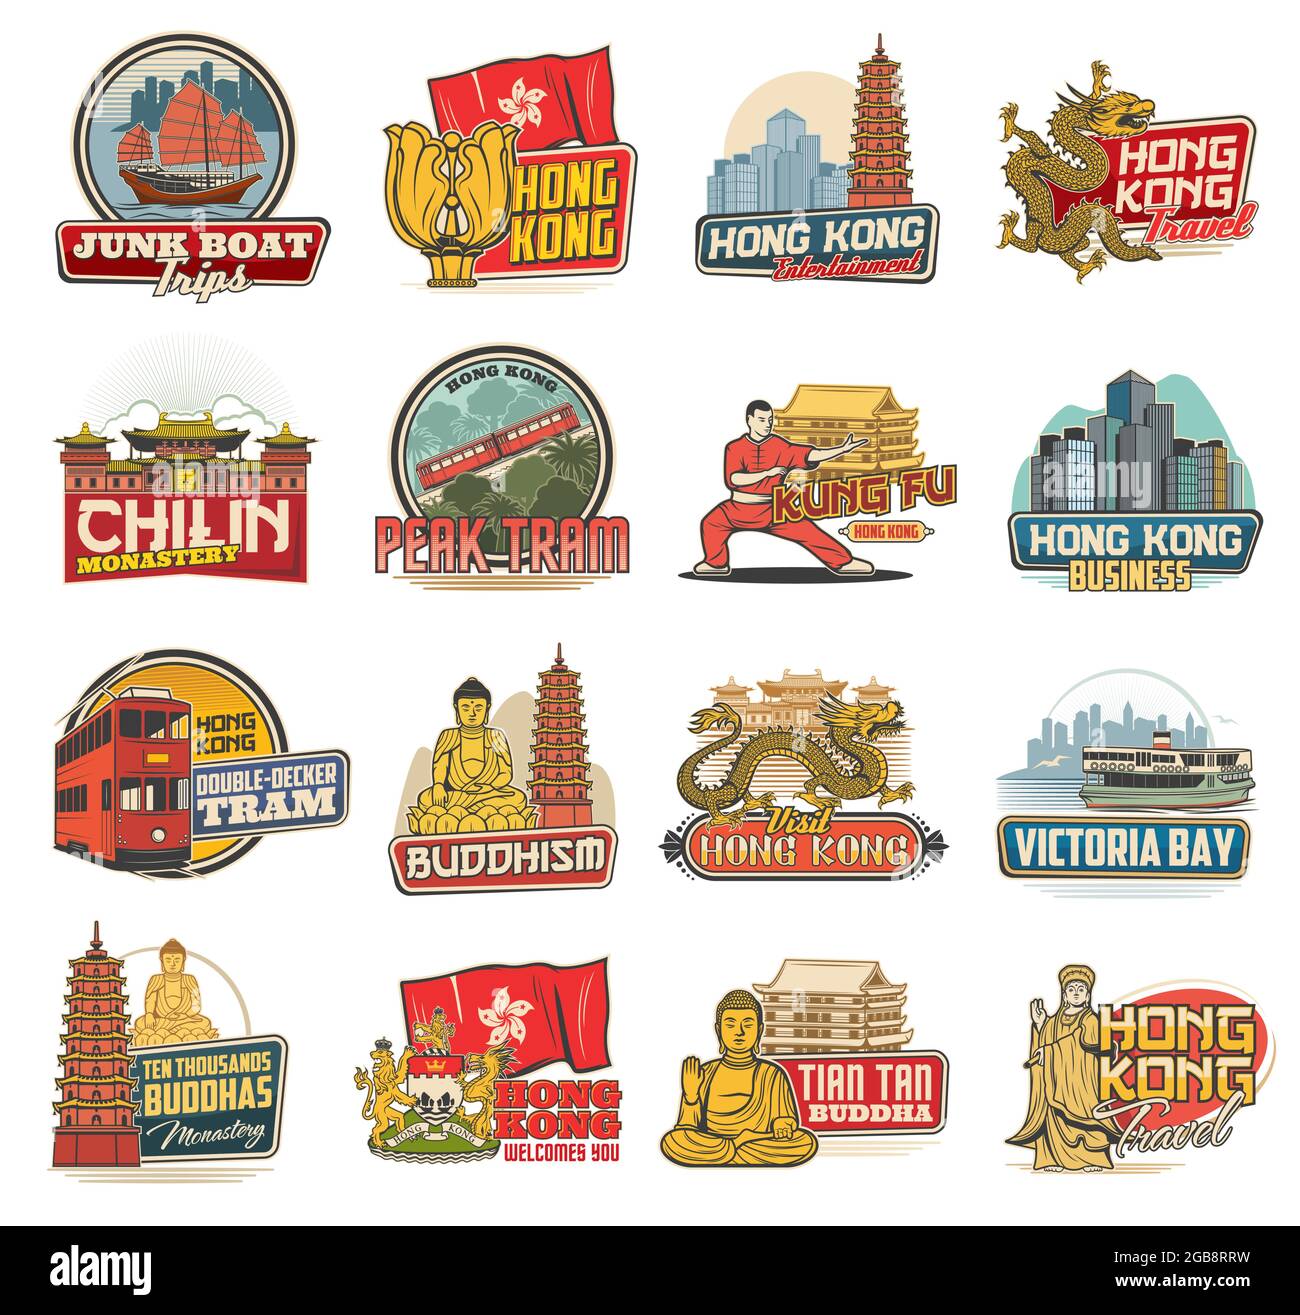 Hong Kong vector icons with Chinese travel landmarks, religion and culture symbols. Isolated Hong Kong flag with bauhinia flower, Buddha statue and te Stock Vector